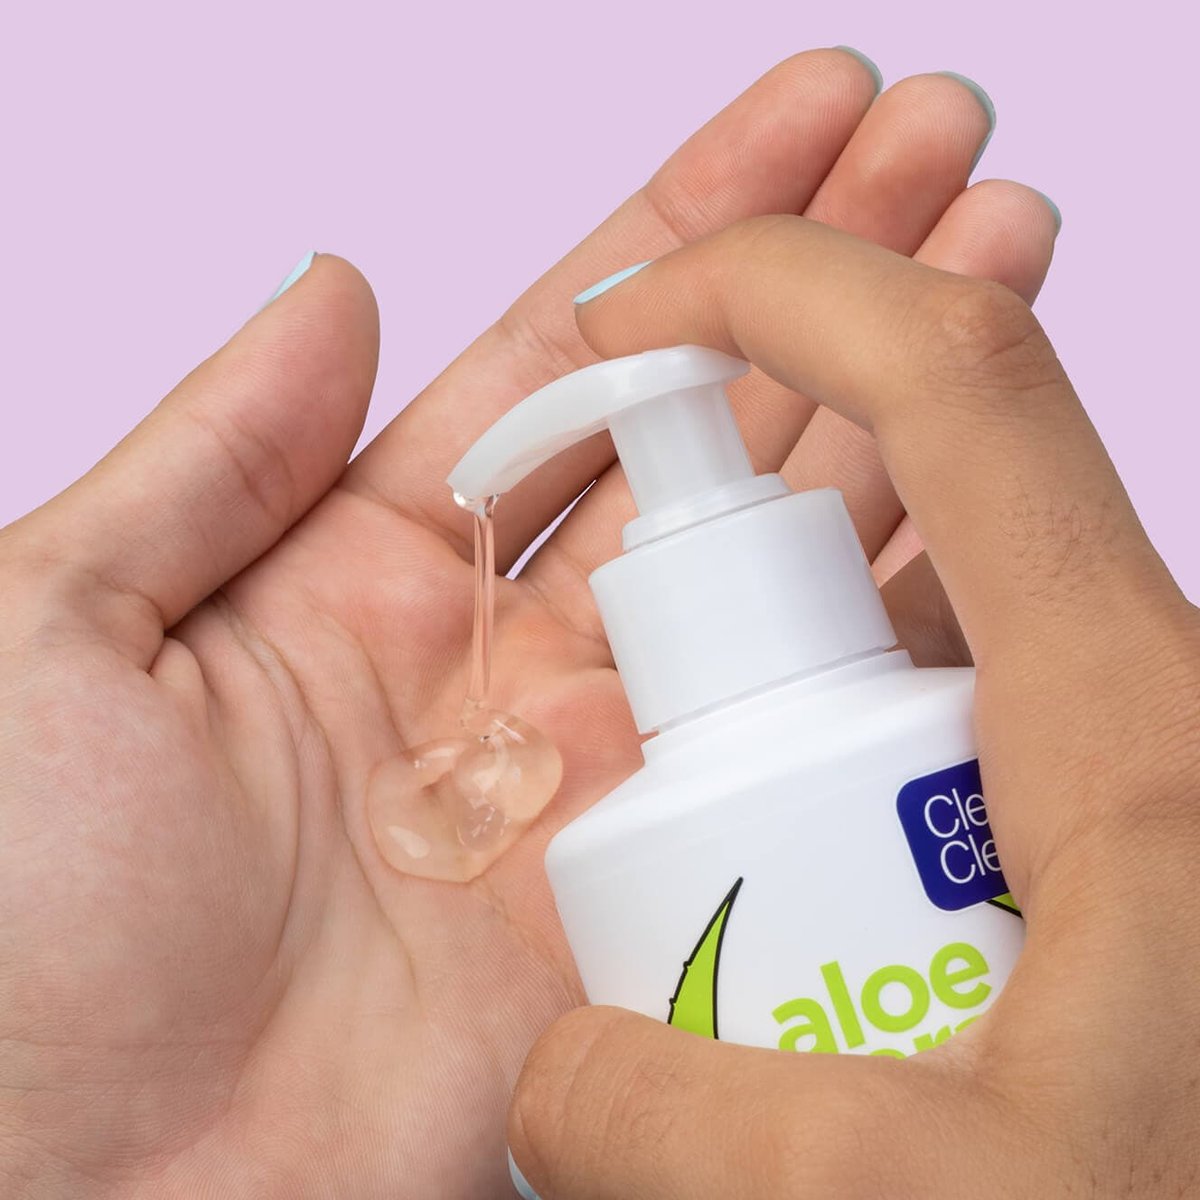 White pump bottle pouring cleanser into hand